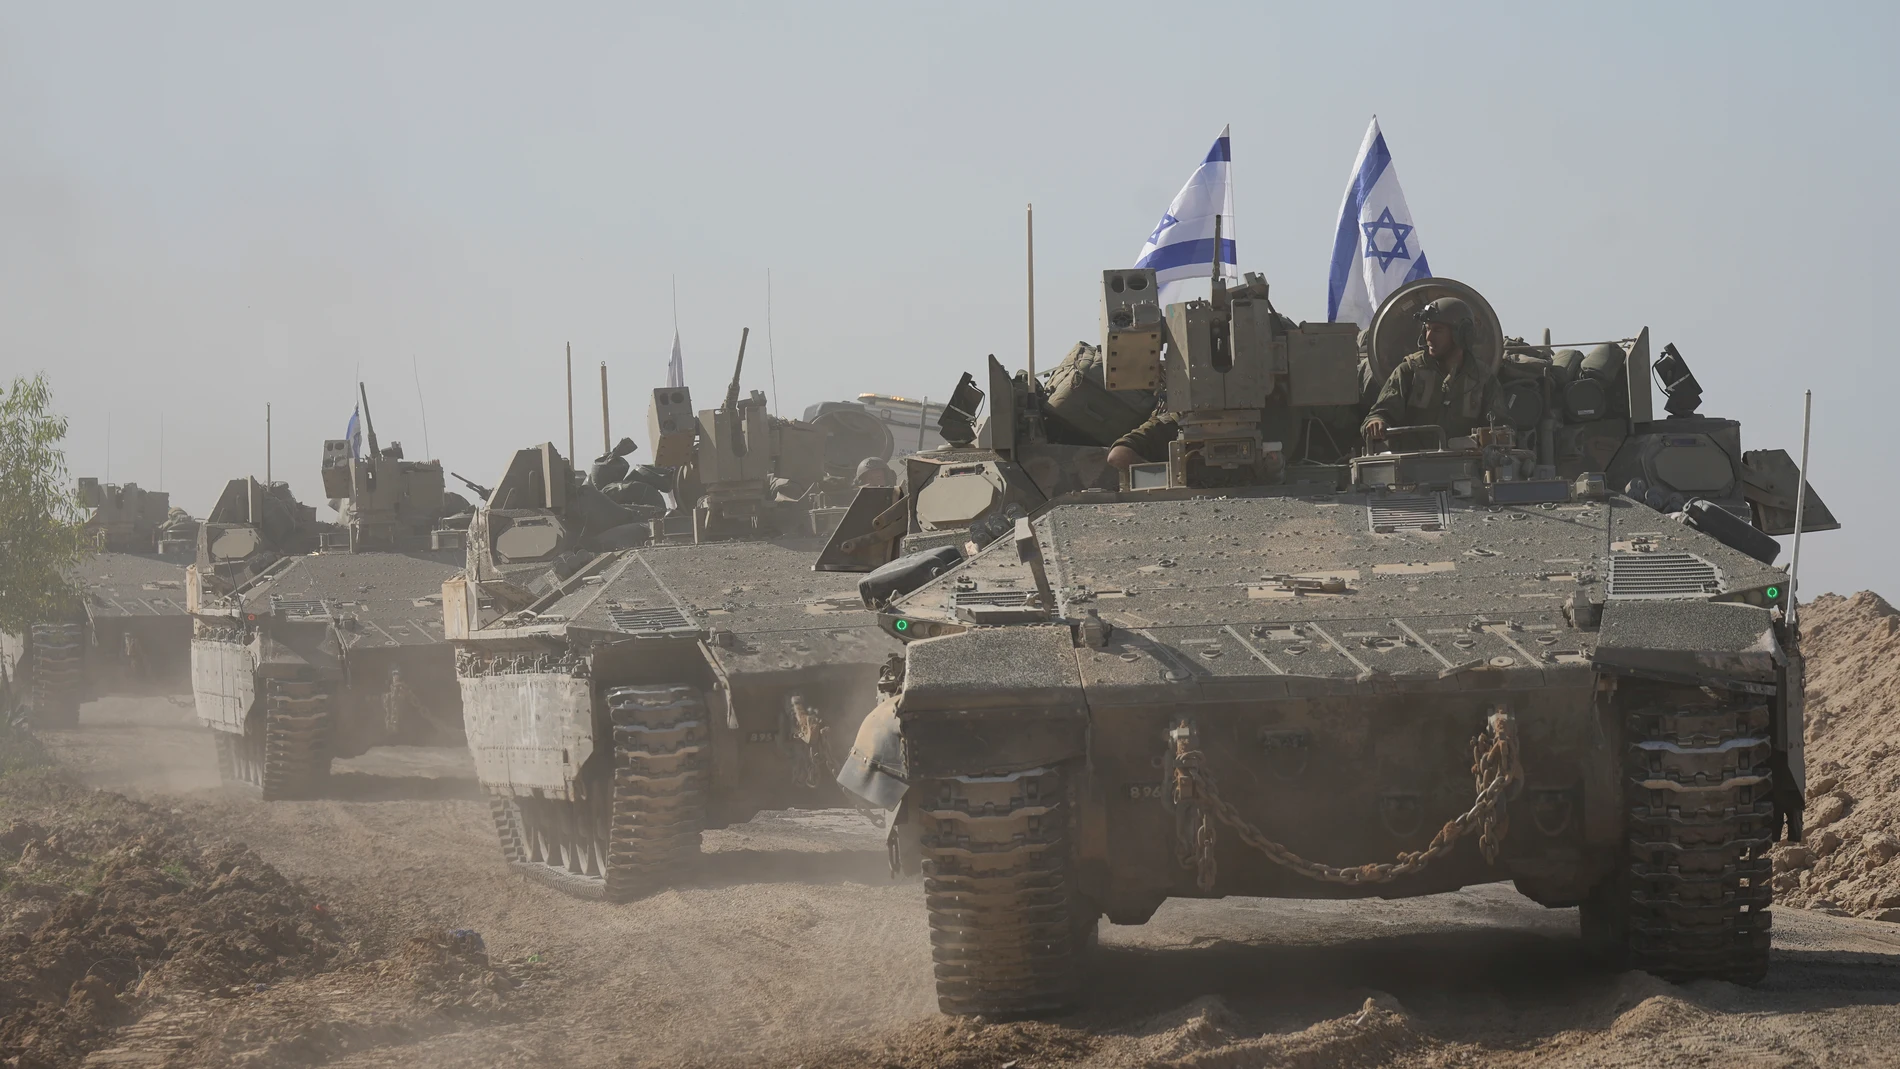 A convoy of Israeli army vehicles maneuvers near Israel's border after leaving Gaza, southern Israel, on Friday, Nov. 24, 2023. Friday marks the start of a four-day cease-fire in the Israel-Hamas war, during which the Gaza militants pledged to release 50 hostages in exchange for 150 Palestinians imprisoned by Israel. (AP Photo/Tsafrir Abayov)